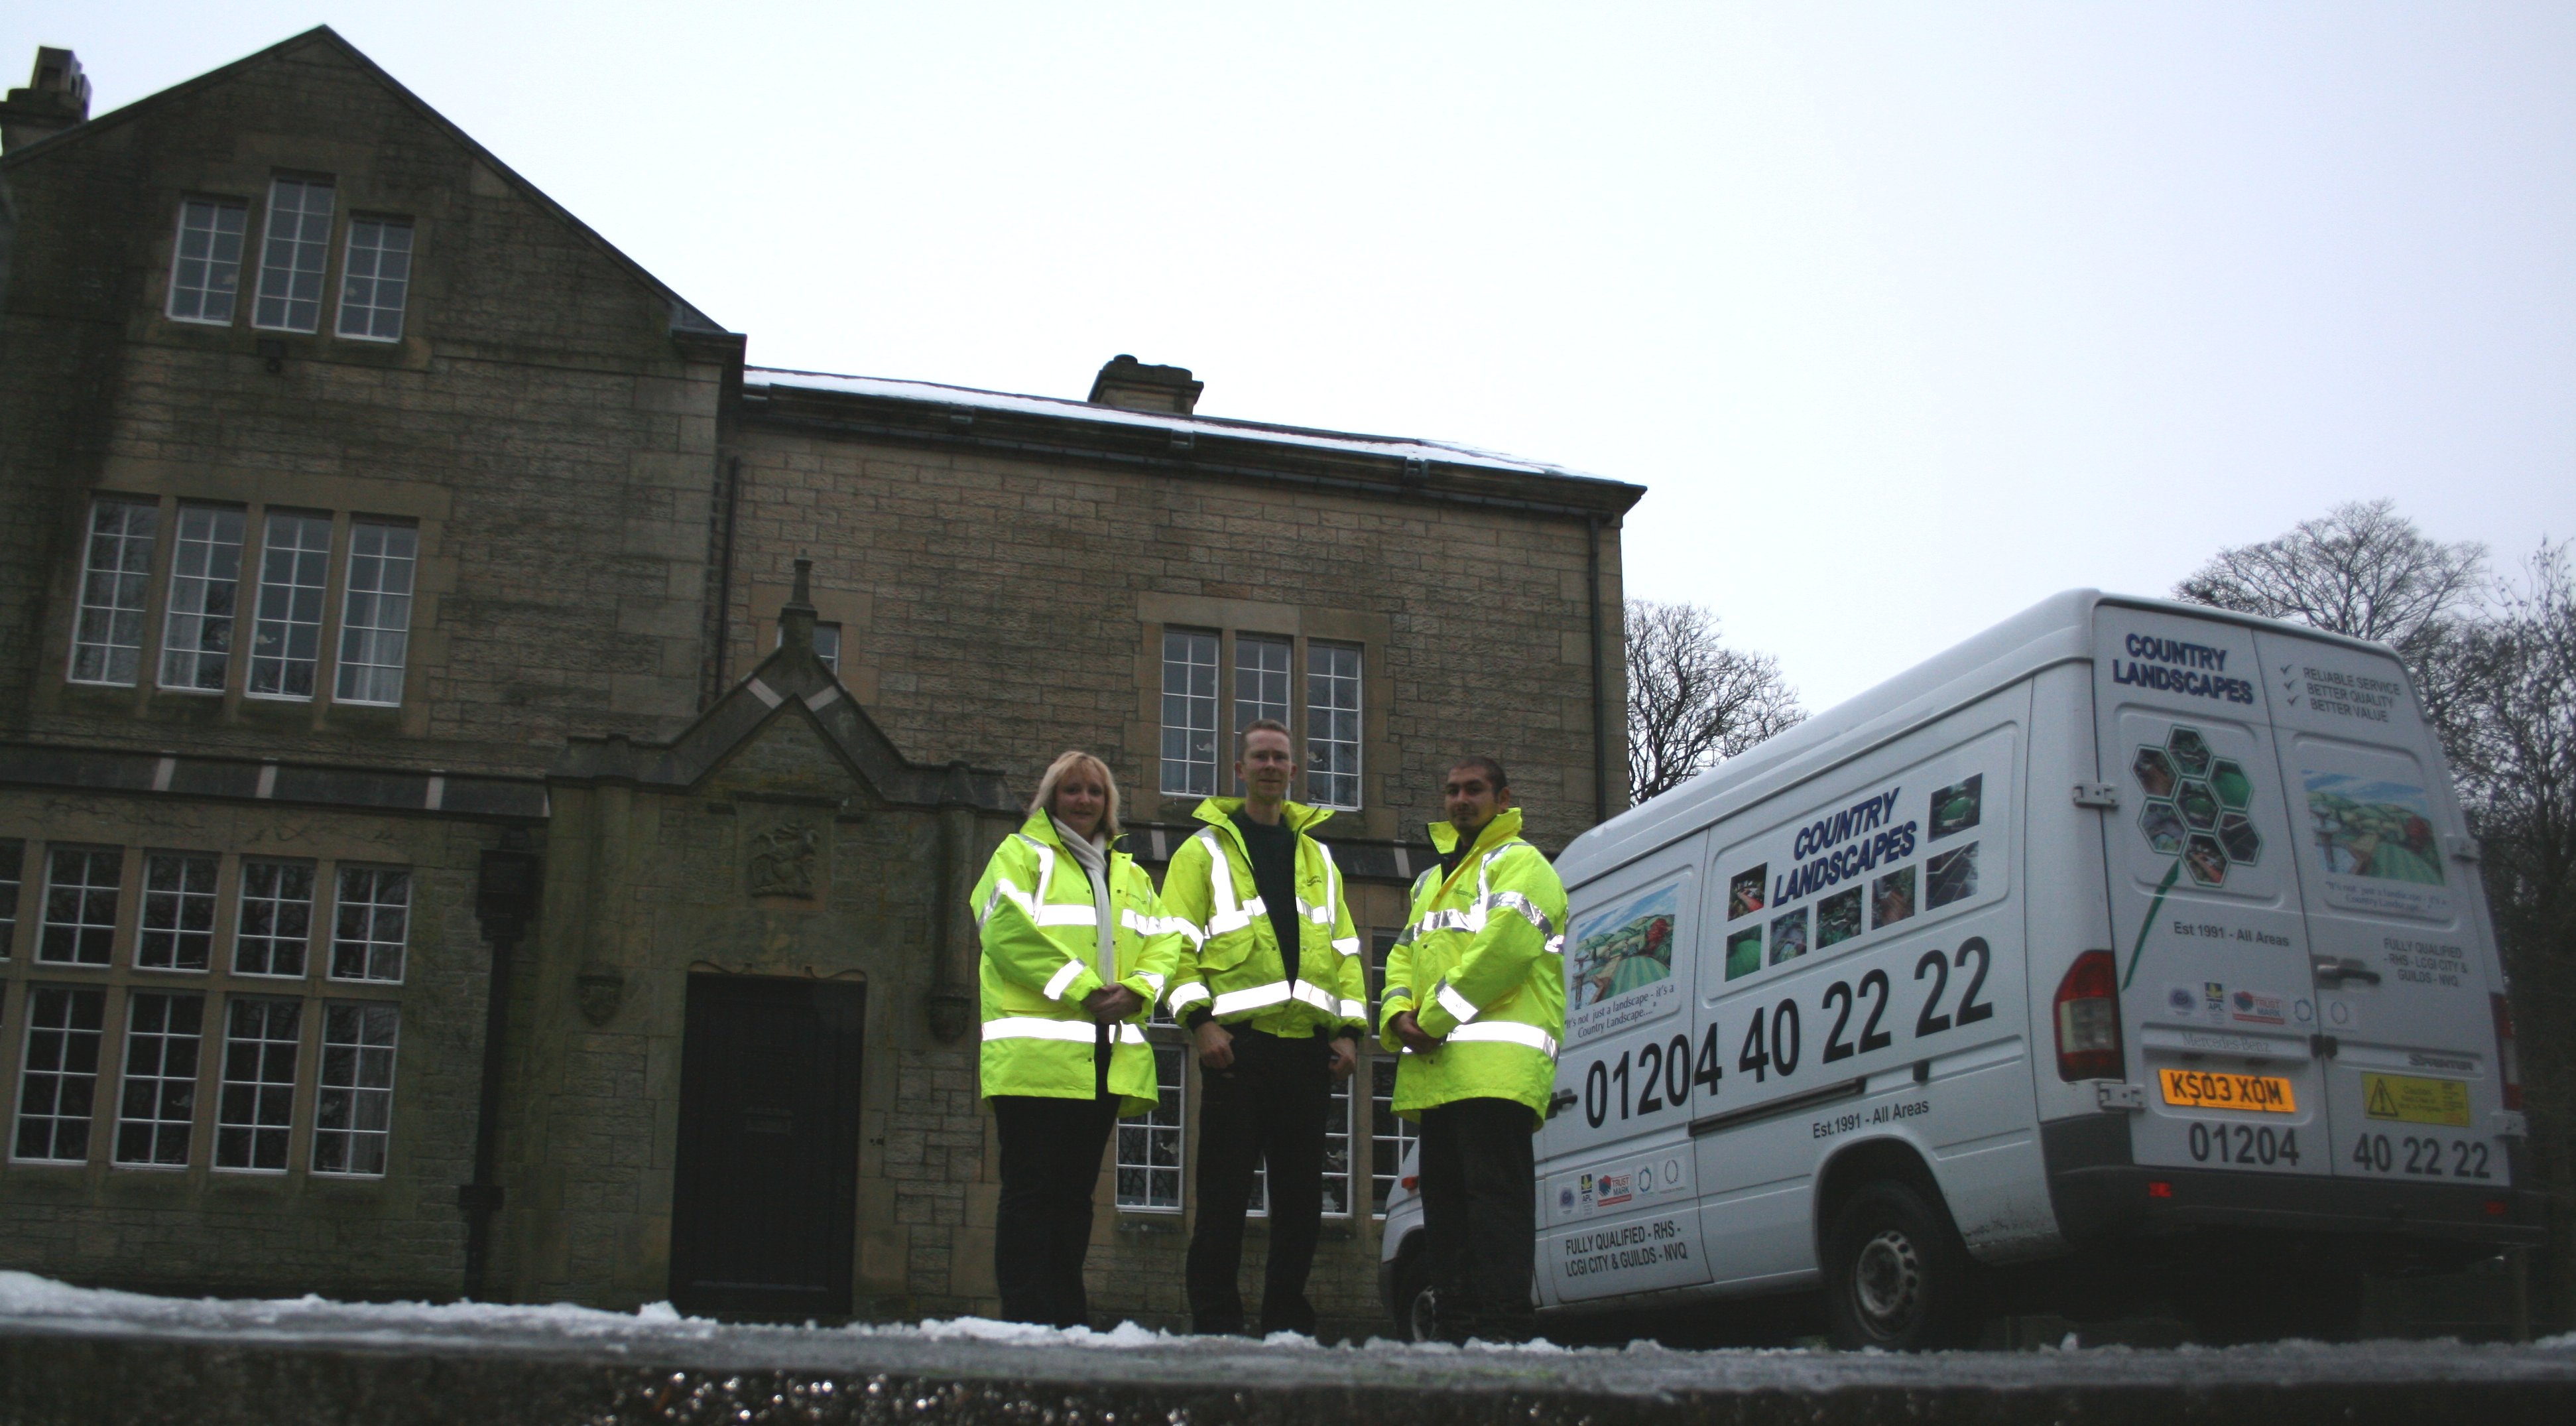 some of the team who worked at Tor Side including Anita Lee and Mick pictured with new van signage and logo